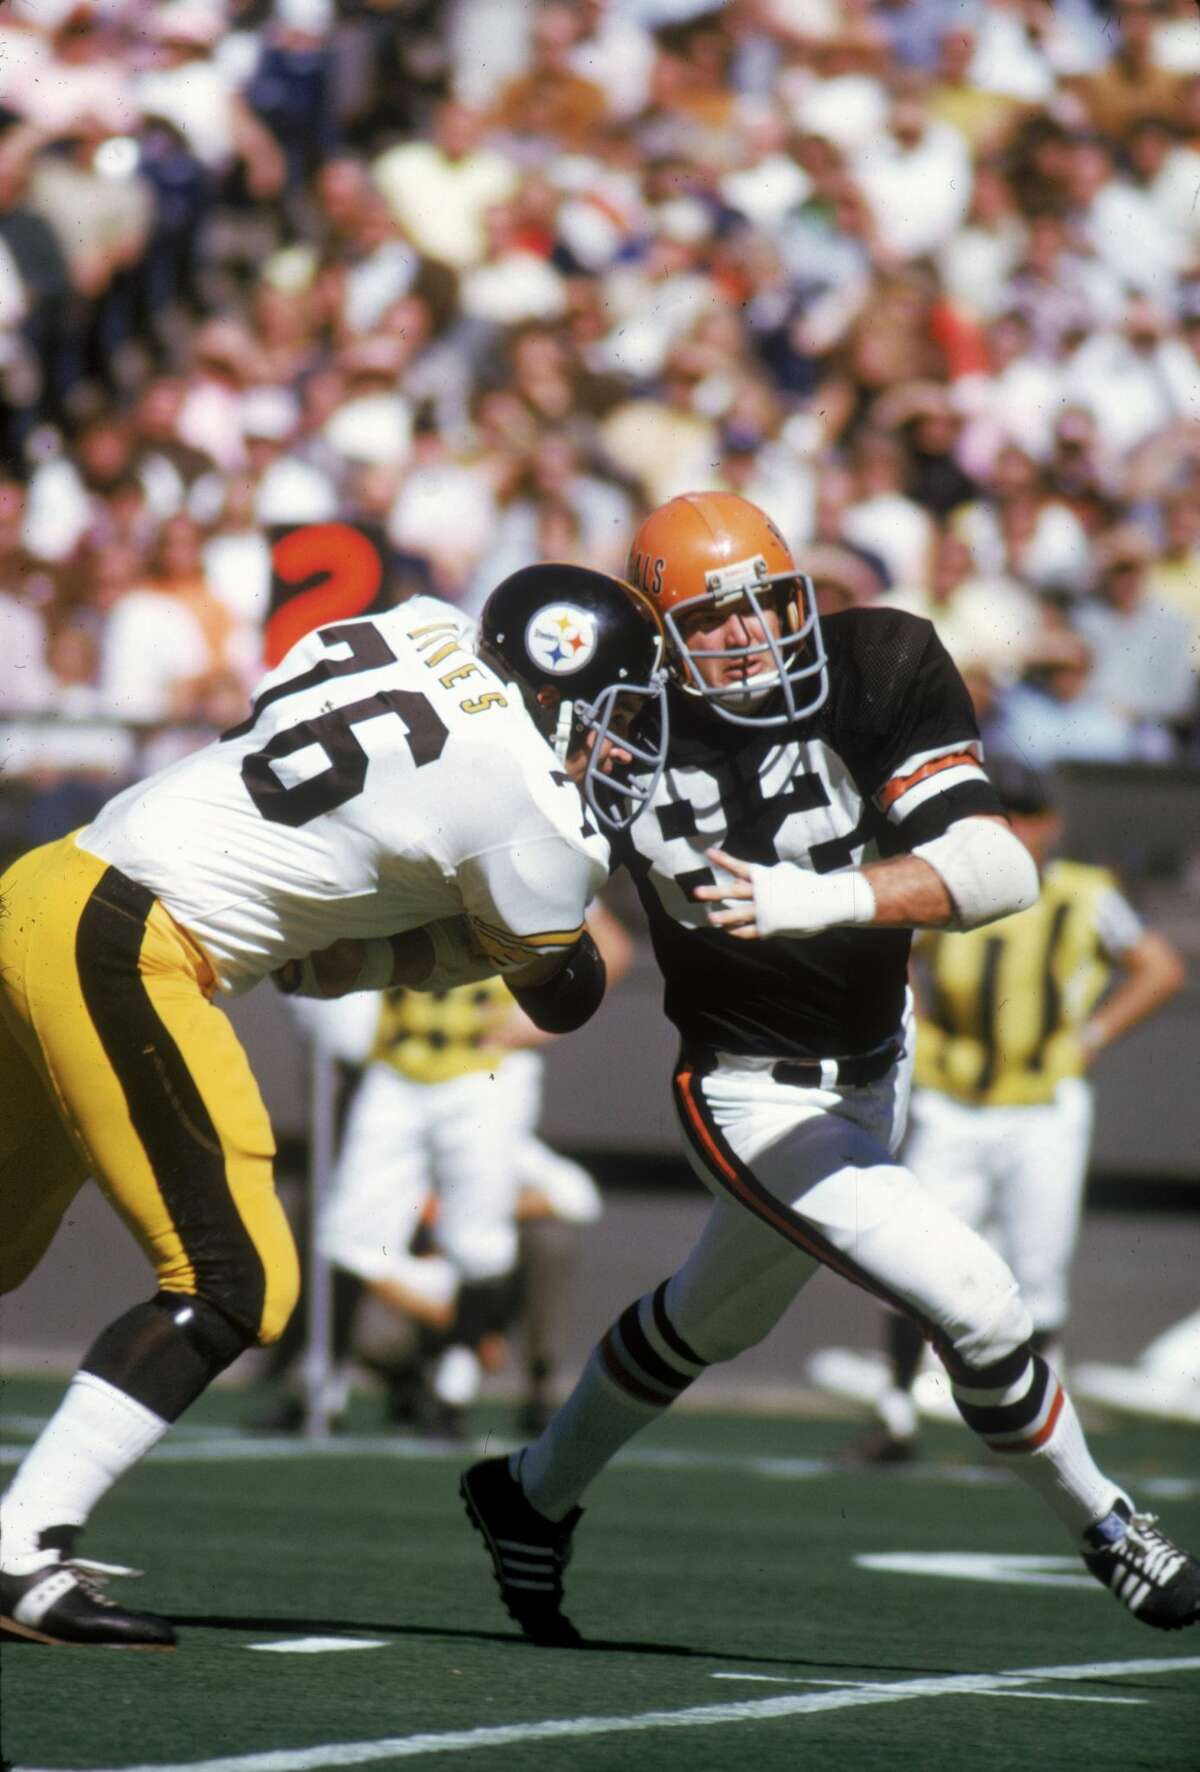 CINCINNATI, OH - OCTOBER 14: Defensive end Royce Berry #82 of the Cincinnati Bengals beats offensive lineman Glen Ray Hines #76 of the Pittsburgh Steelers at Riverfront Stadium on October 14, 1973 in Cincinnati, Ohio. The Bengals defeated the Steelers 19-7. (Photo by Clifton Boutelle/Getty Images)